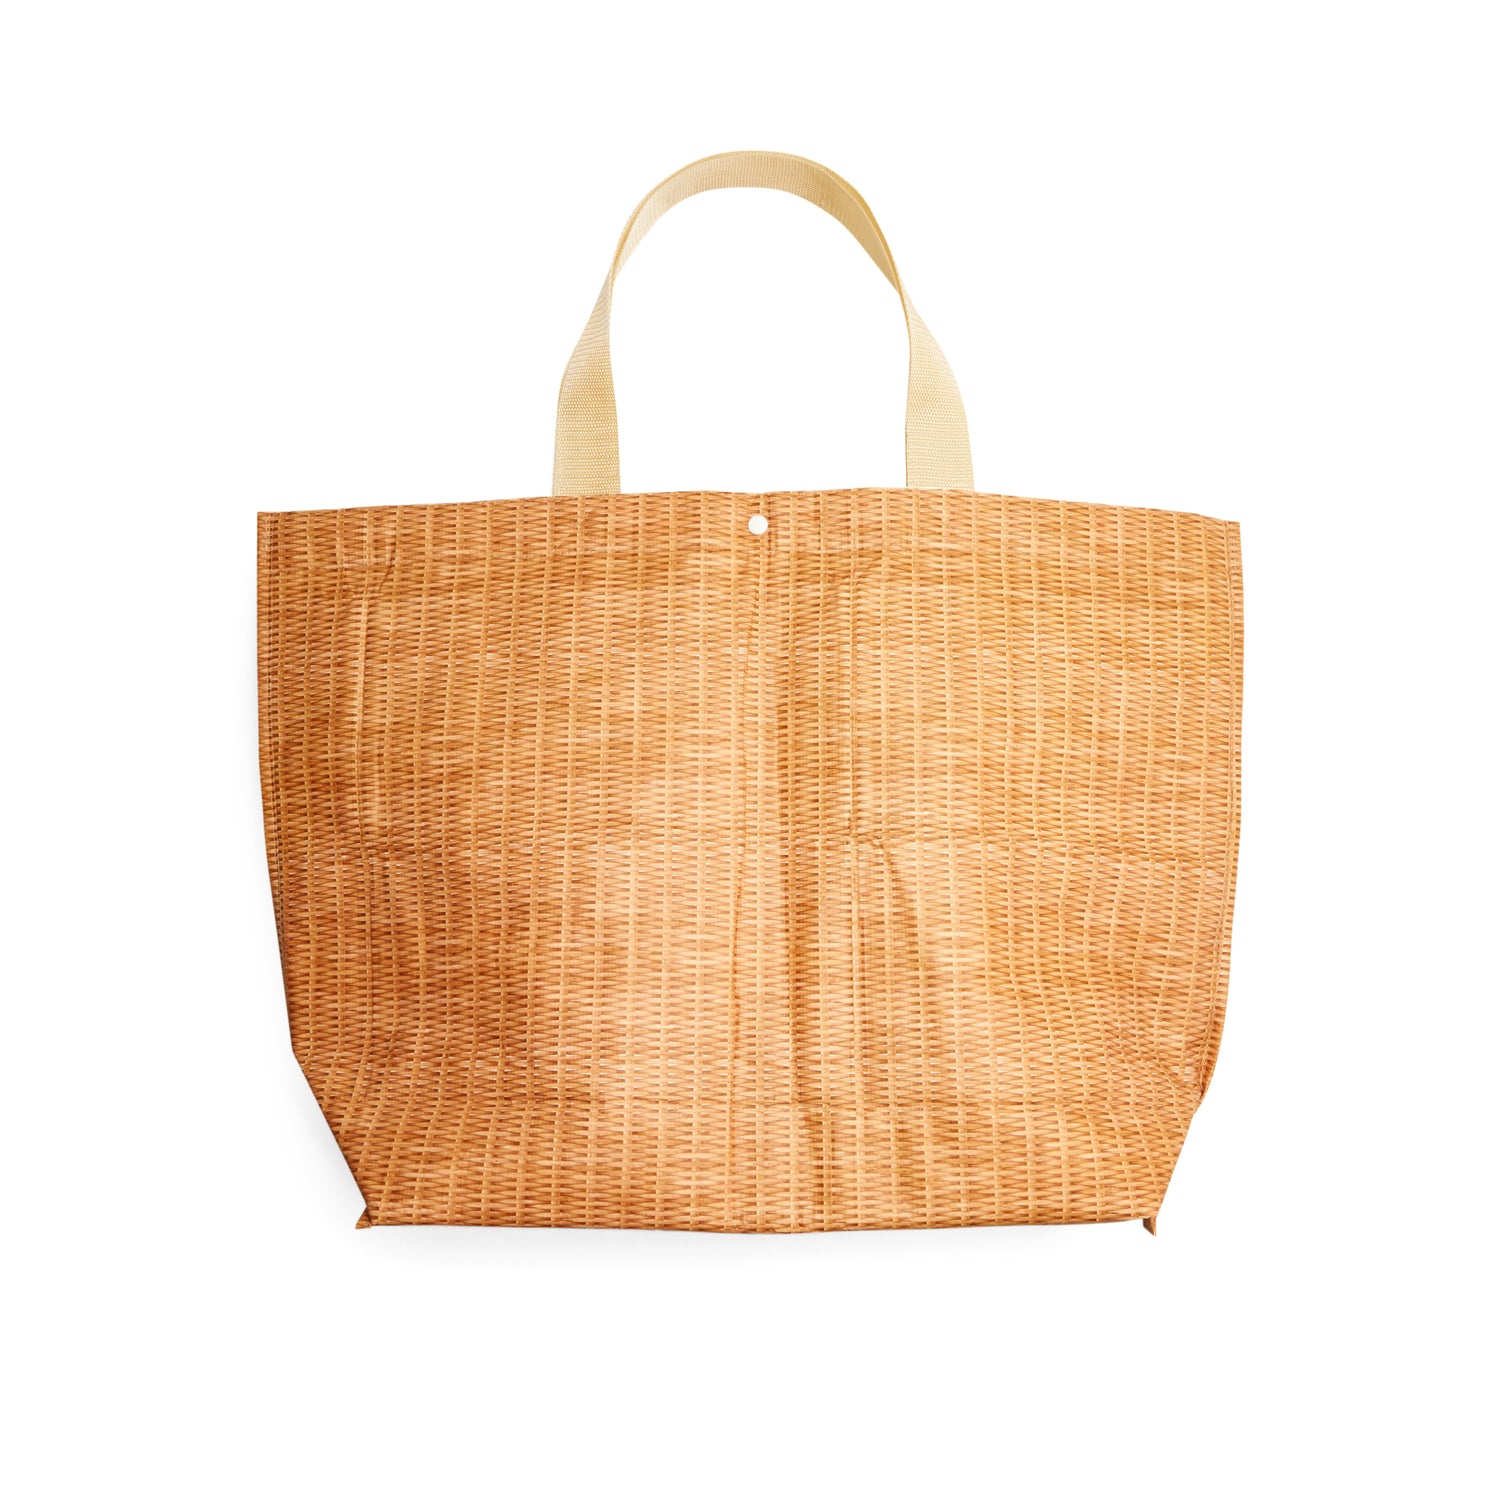 Huge Insulated Tote